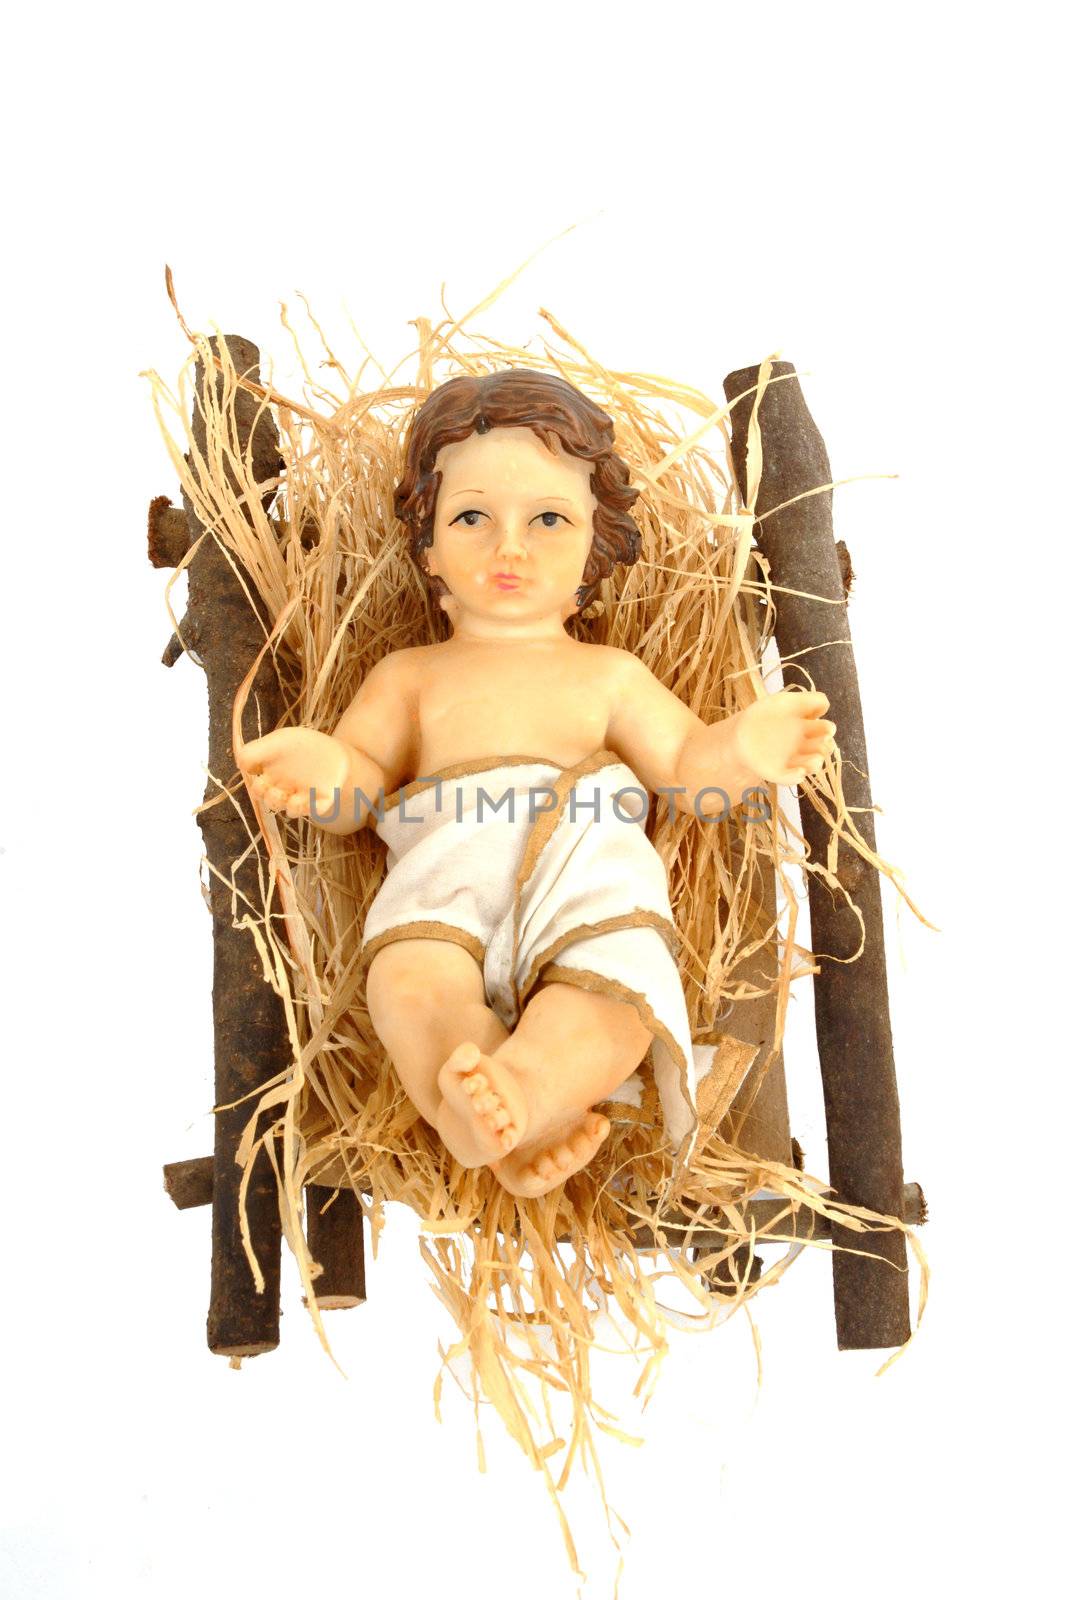 nativity, baby jesus in his crib by Carche